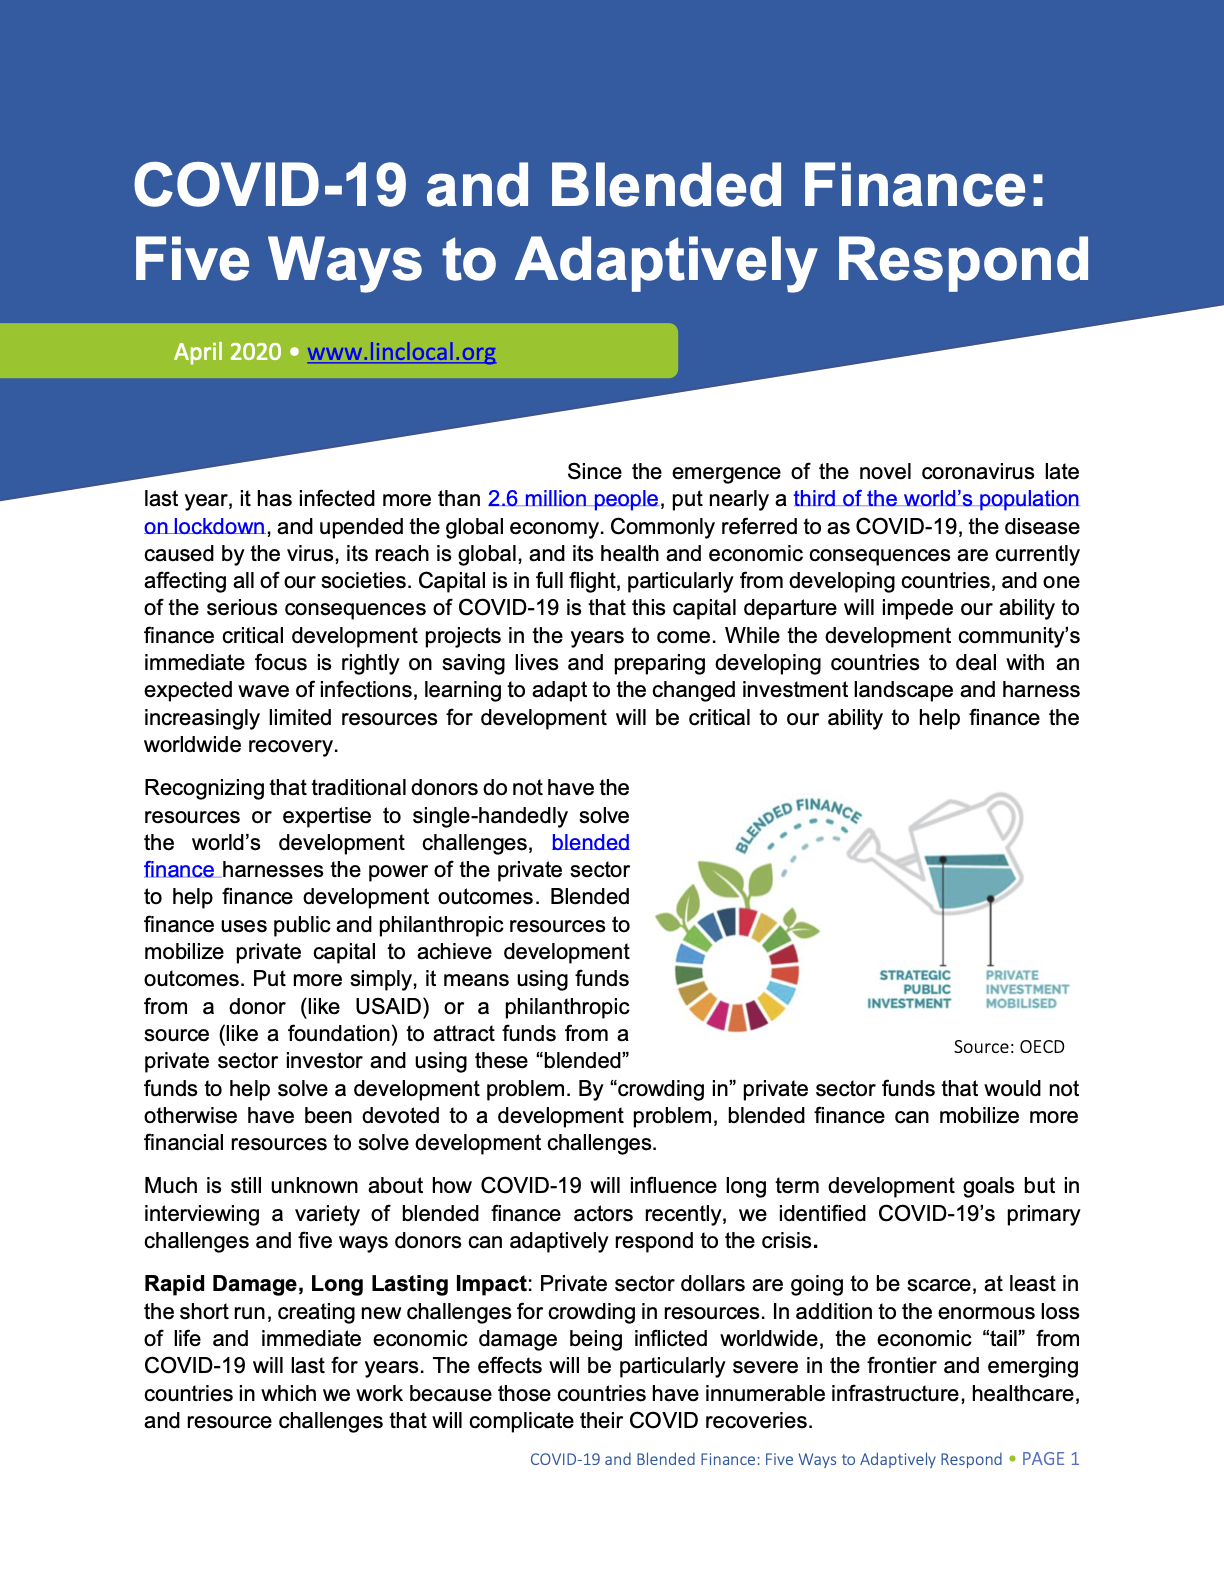 COVID-19 and Blended Finance: Five Ways to Adaptively Respond